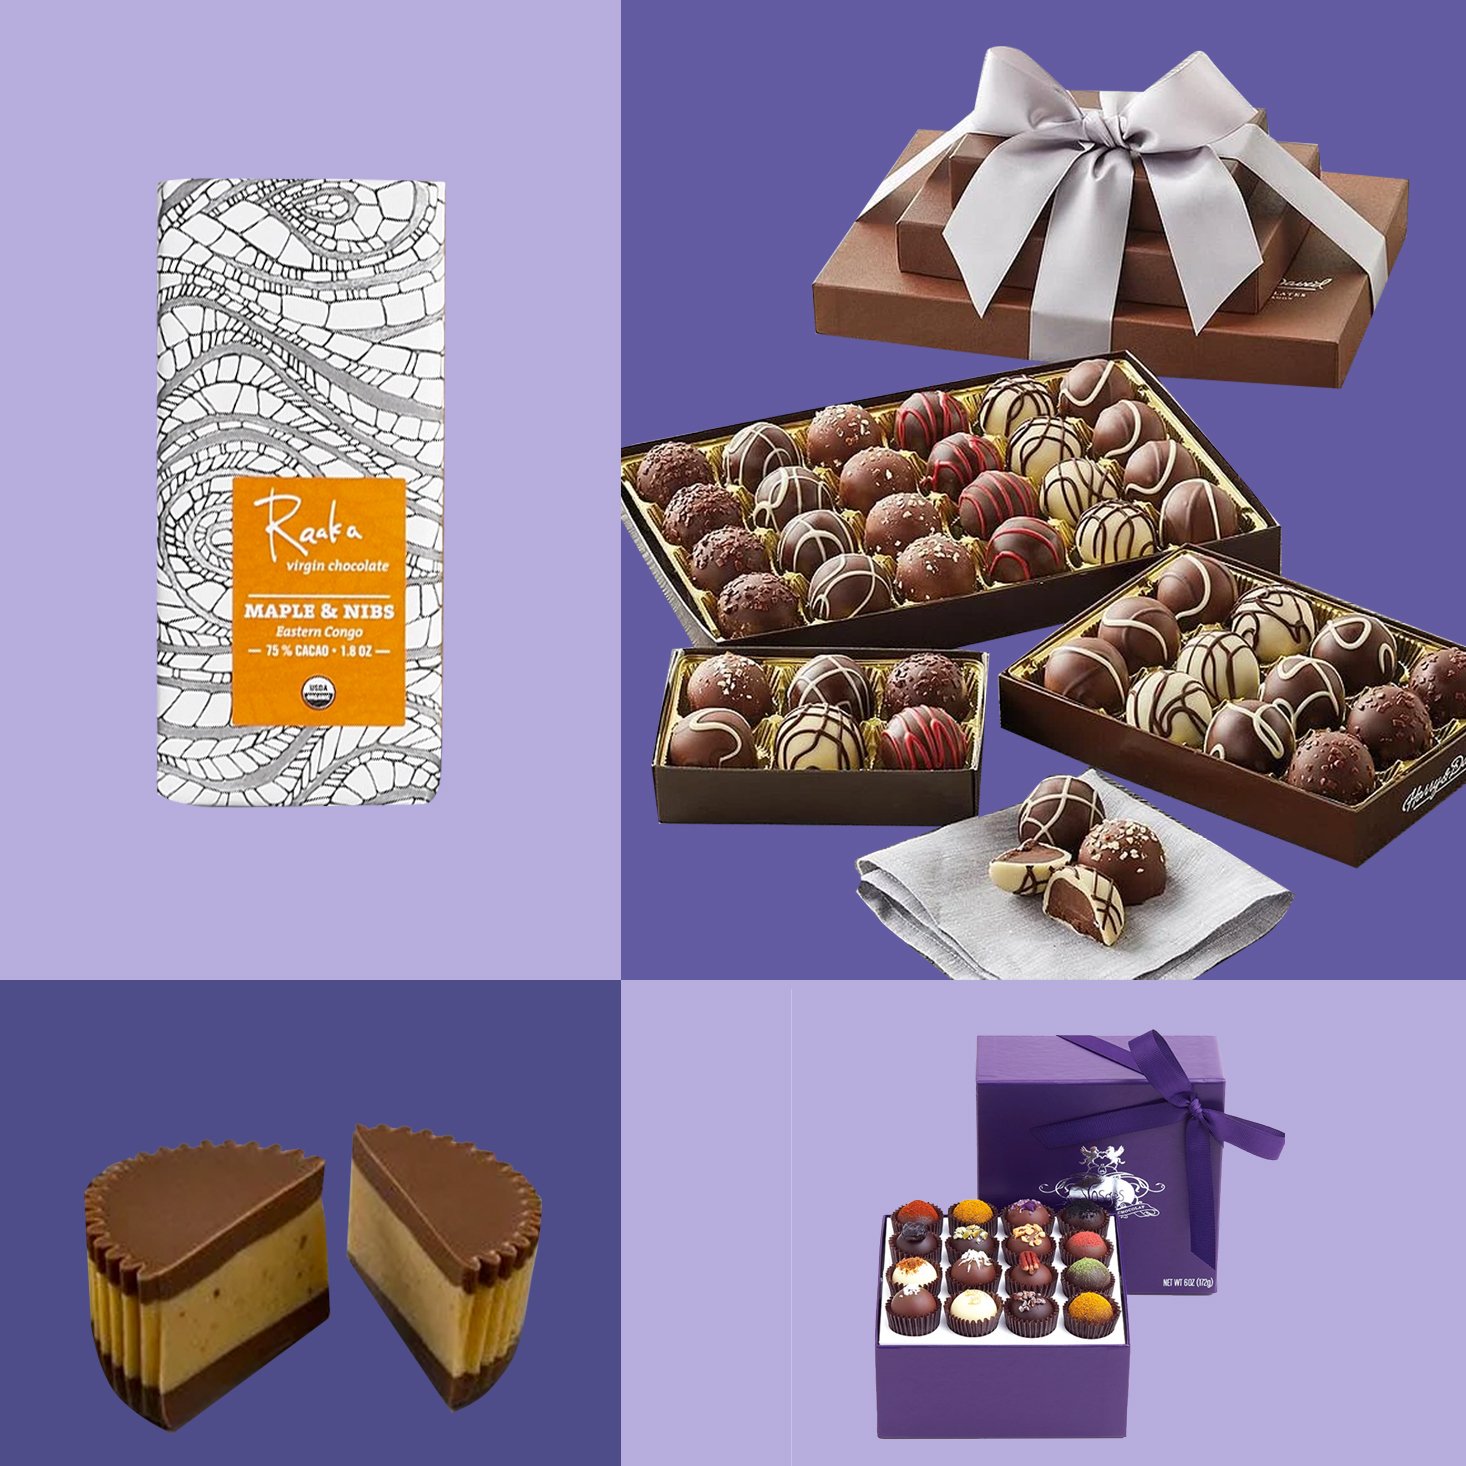 19 Sweet Treats & Gifts For Chocolate Lovers